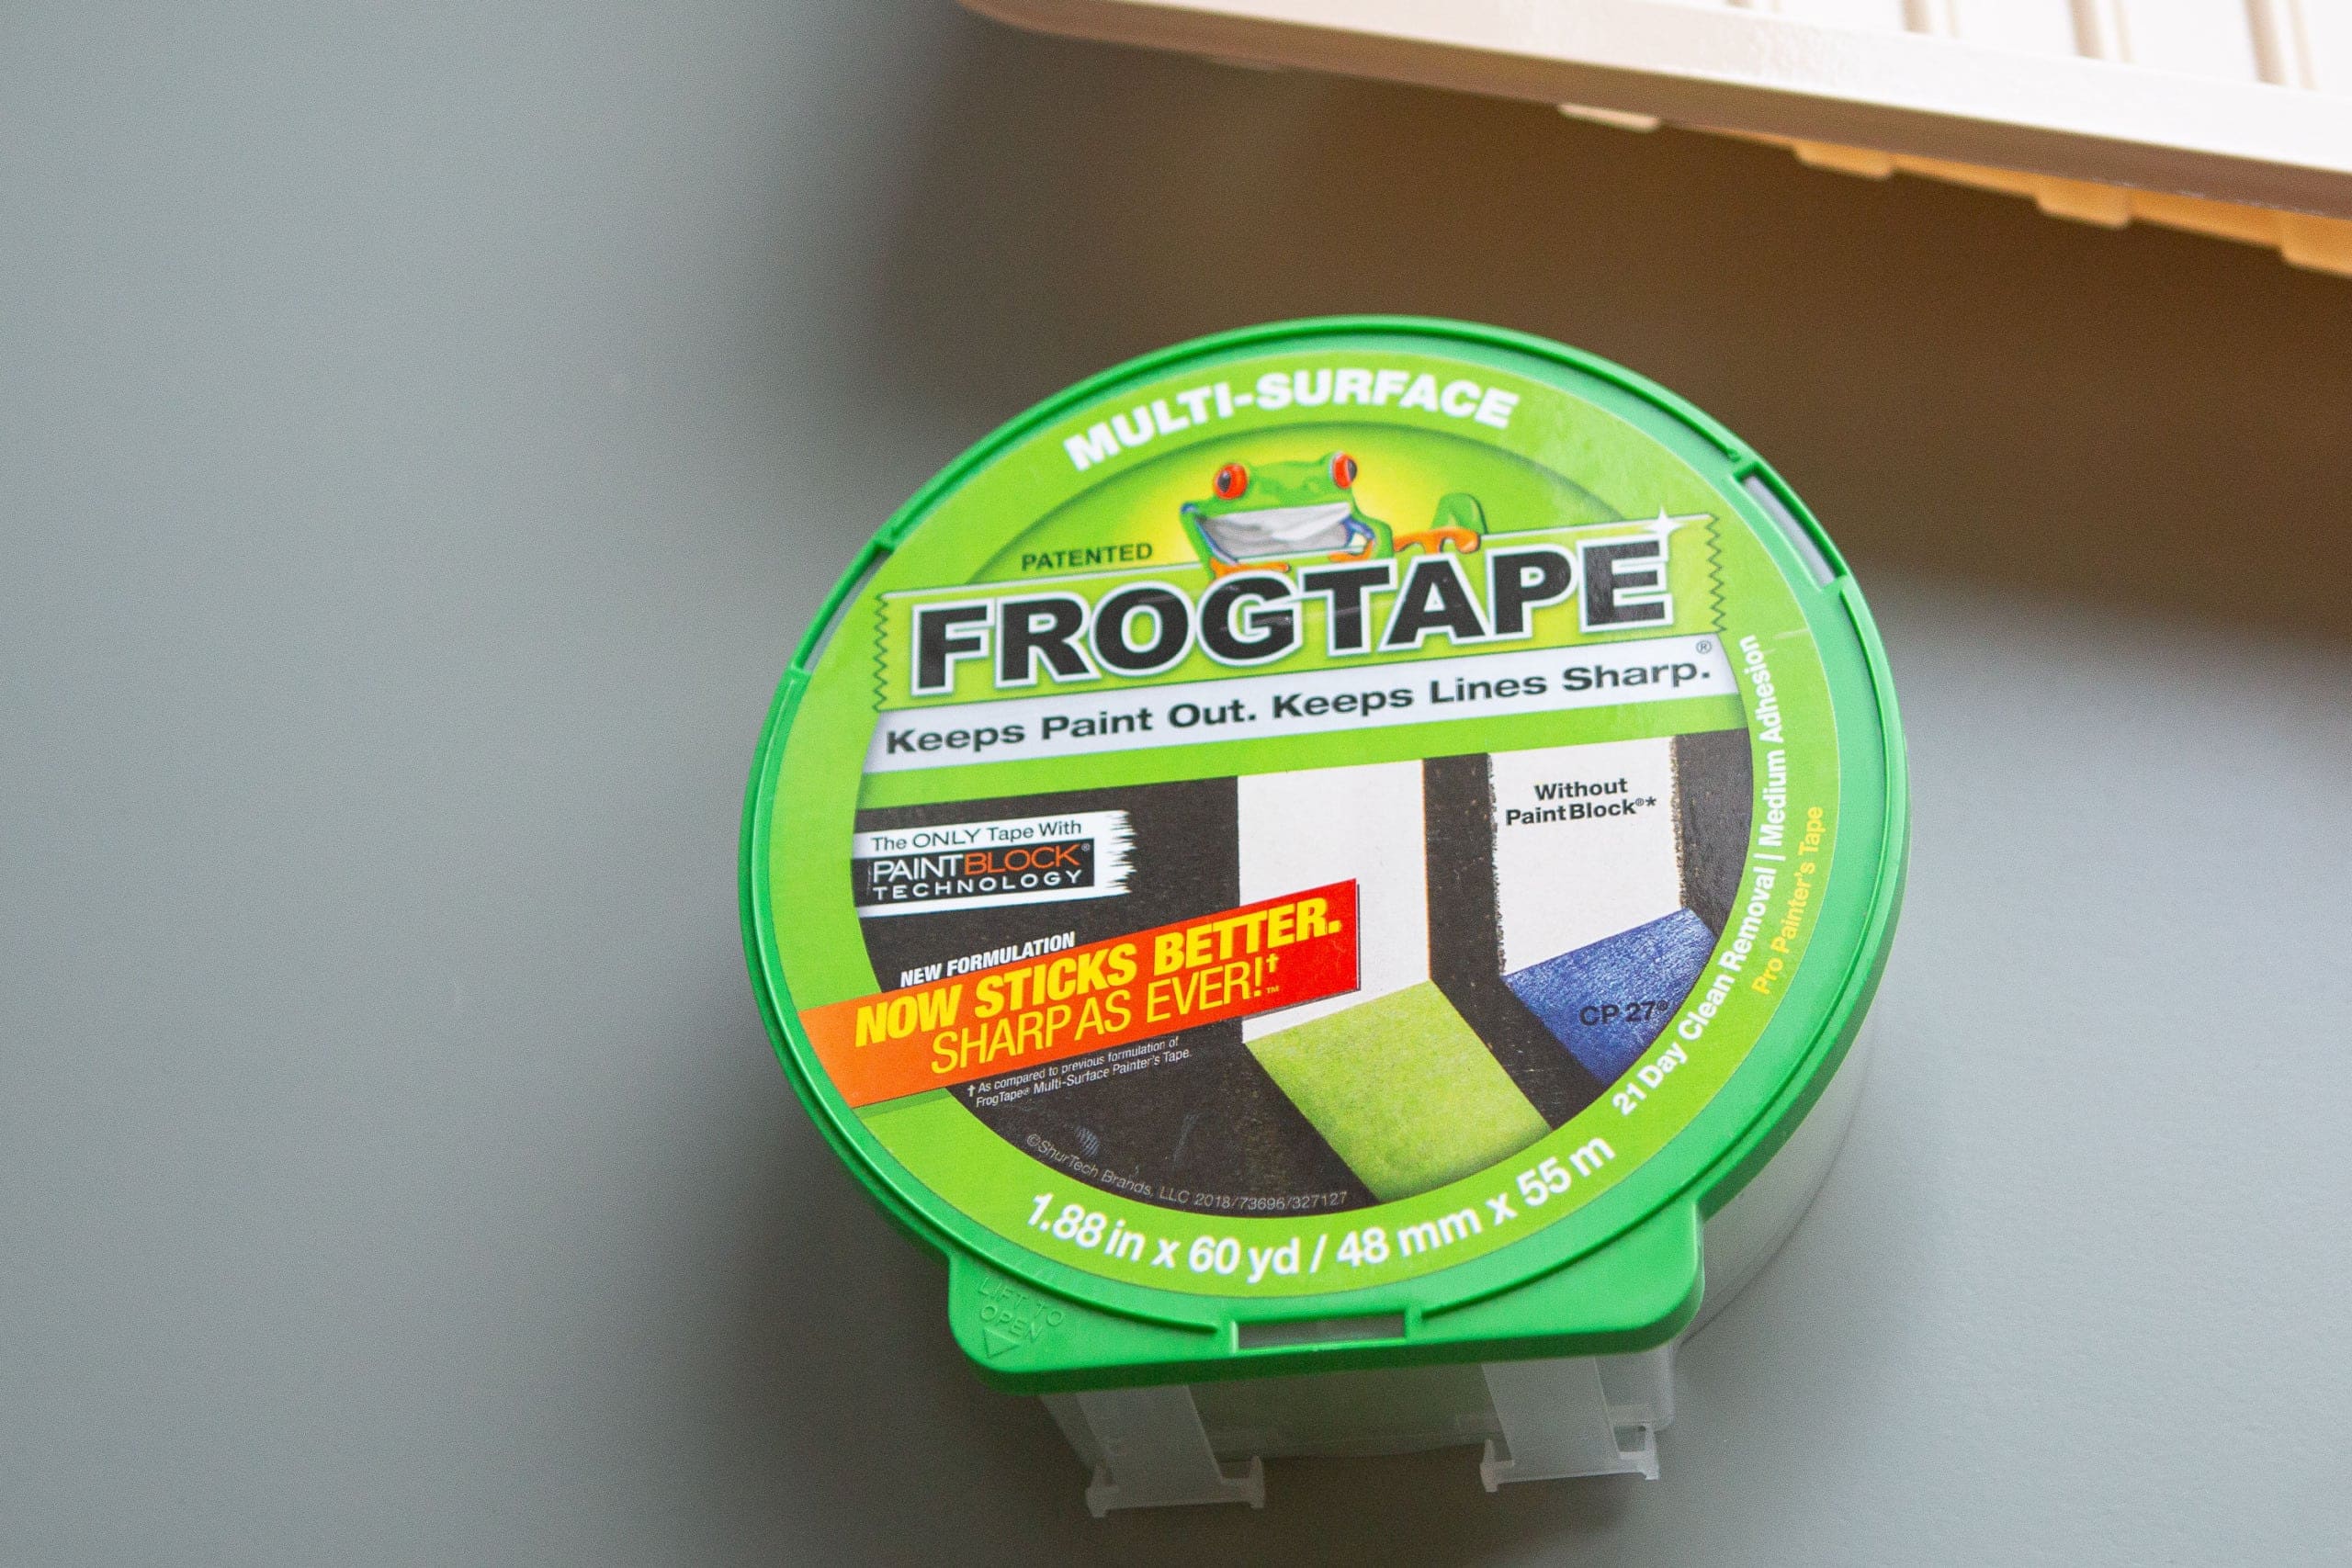 Use frogtape when prepping a room for paint